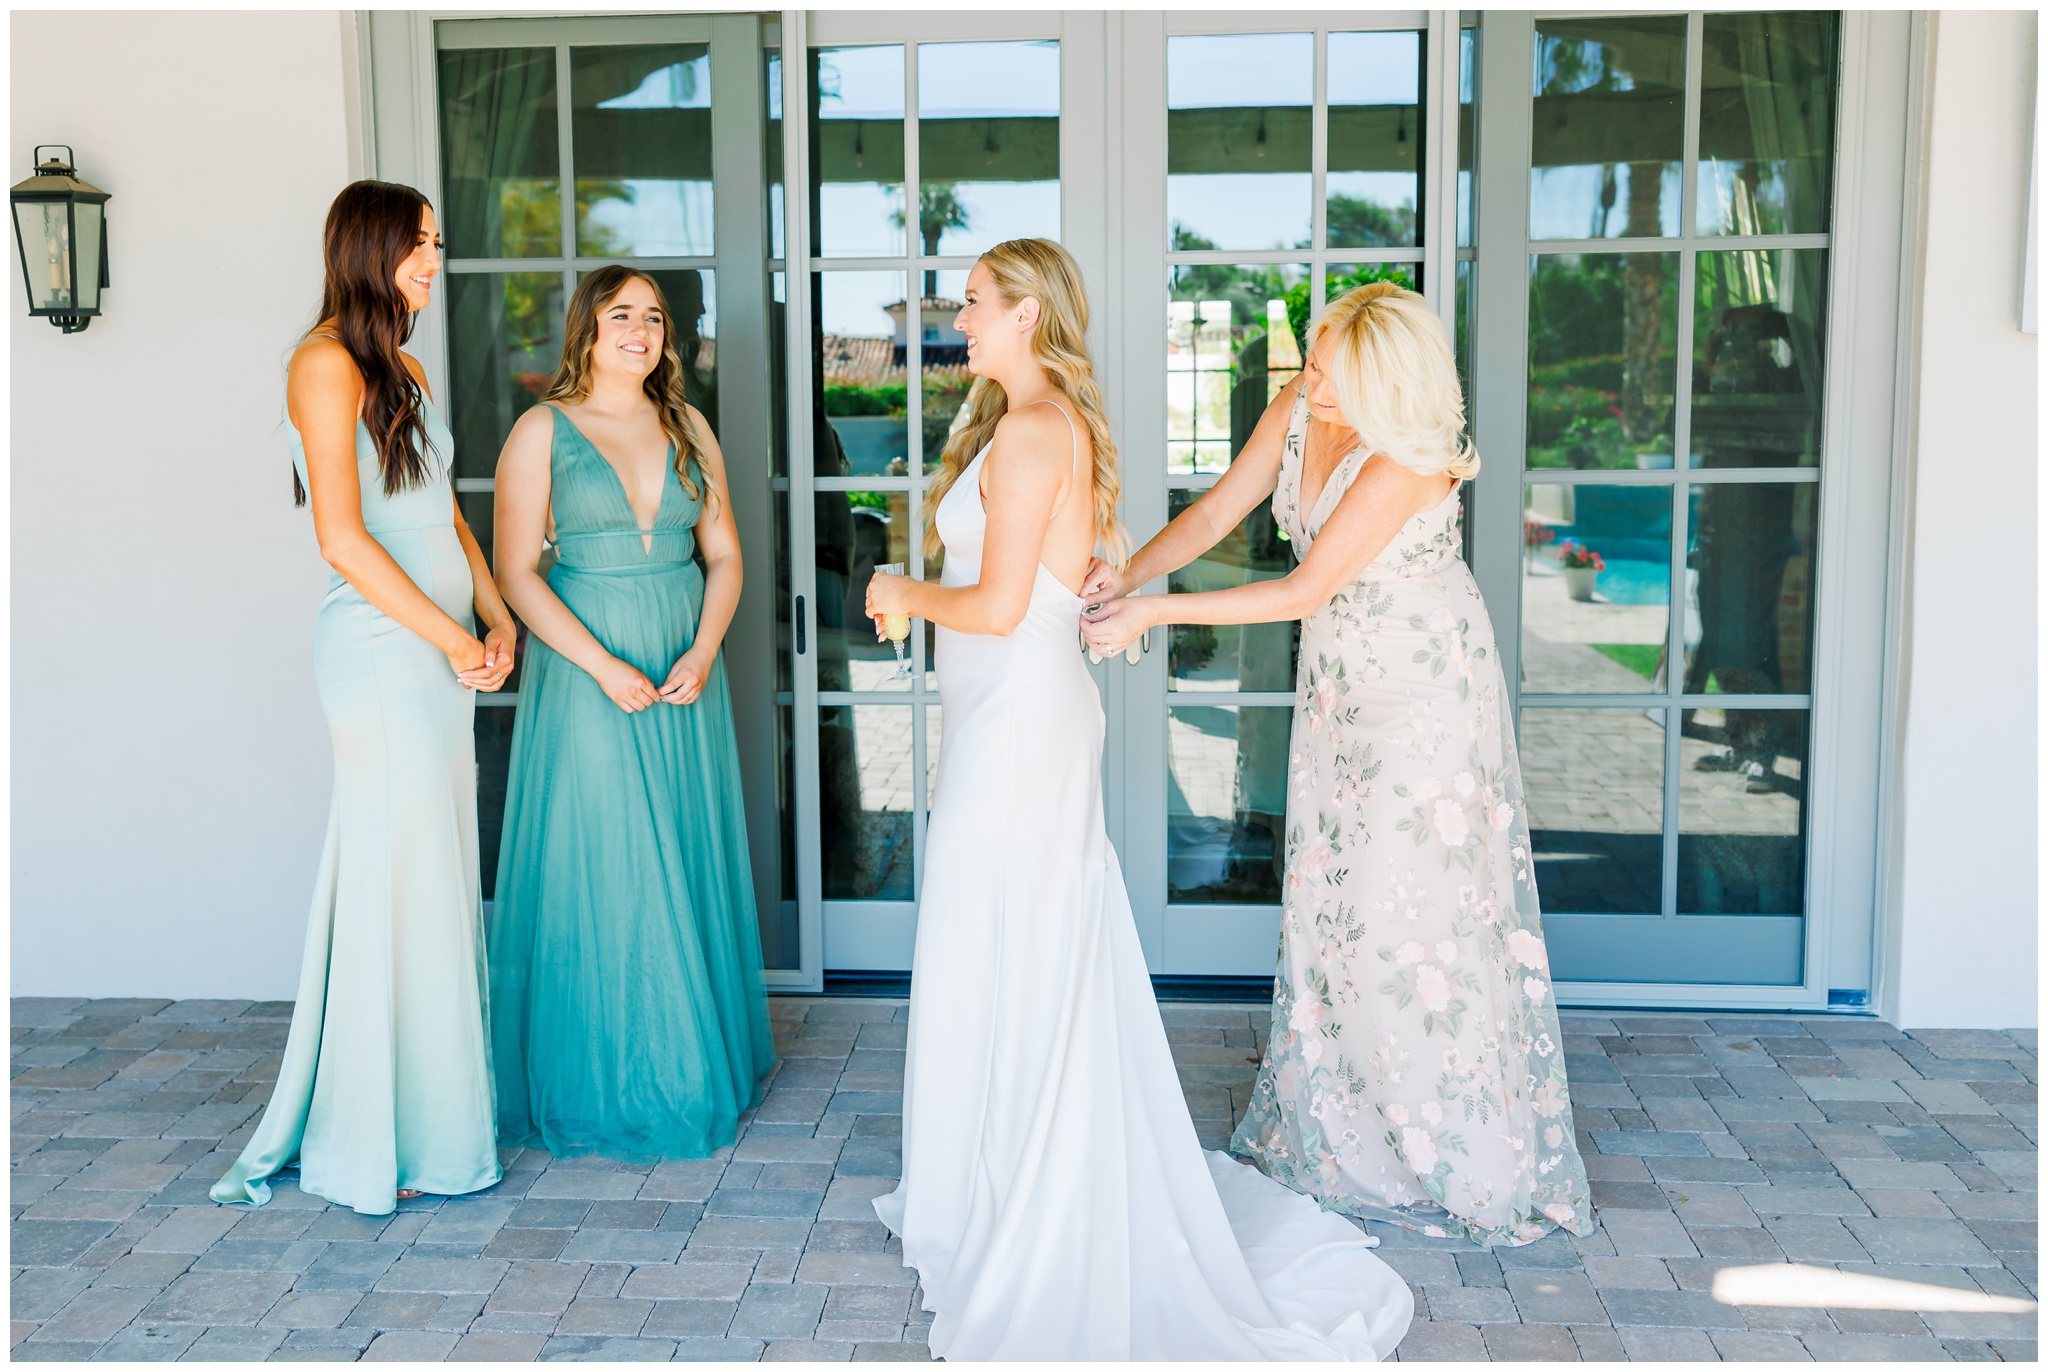 Bridesmaids helping mother of the bride get ready